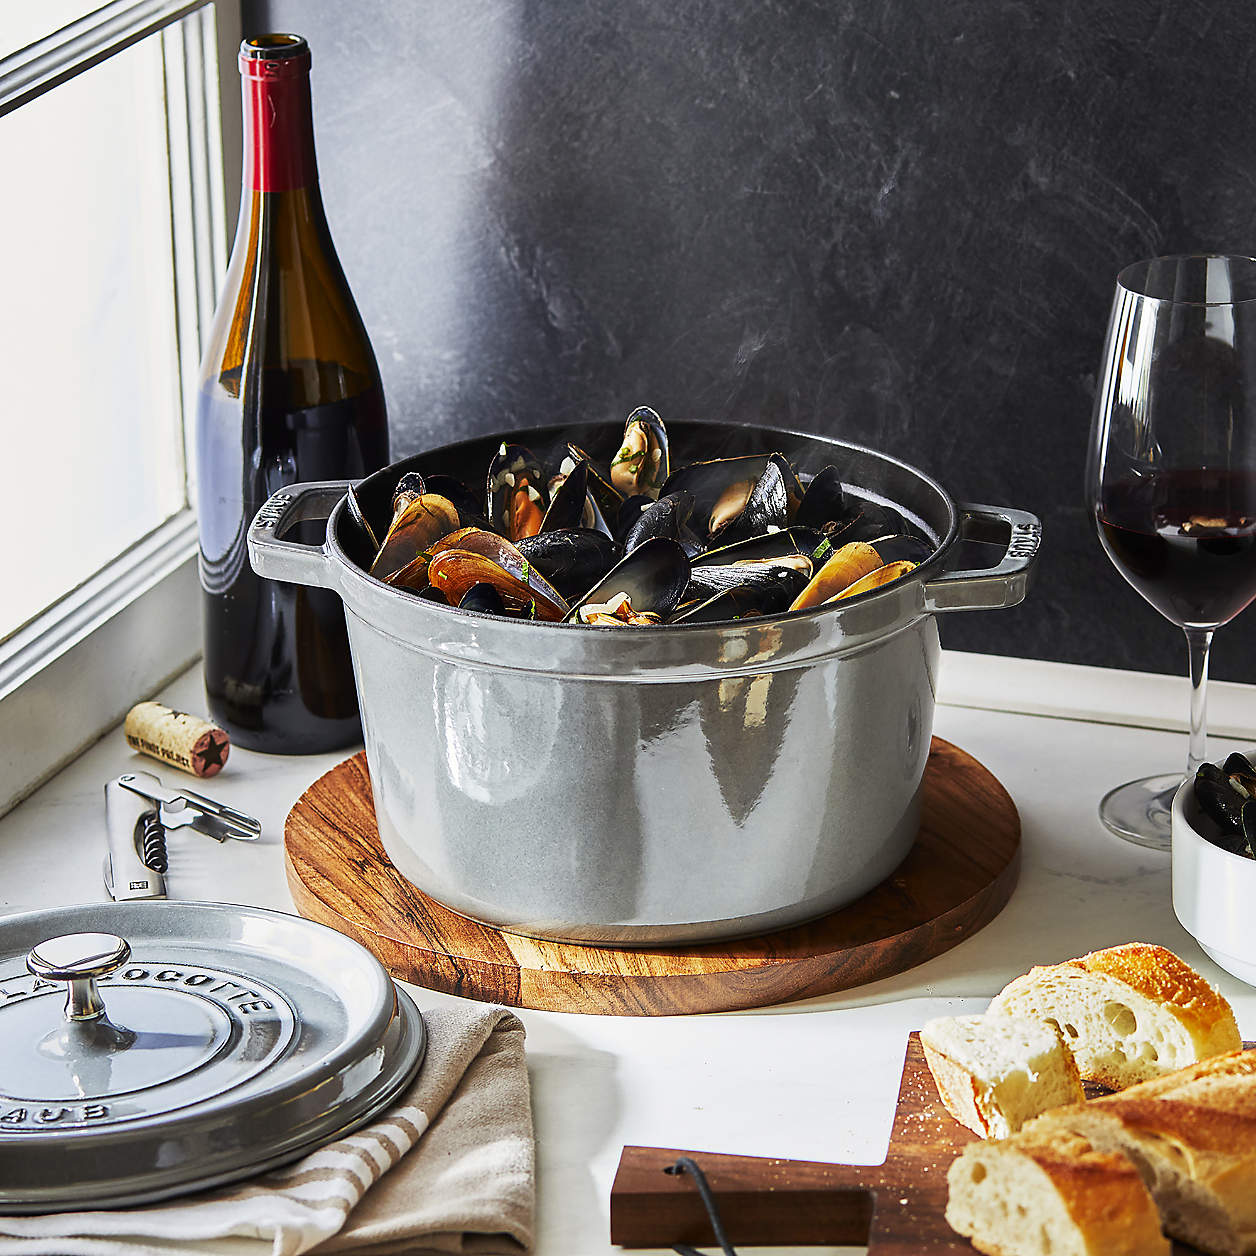 dutch oven on tabletop filled with oysters. glass and bottle of wine and bread on cutting board also on the table. A window lights the table set in front of a black back ground.